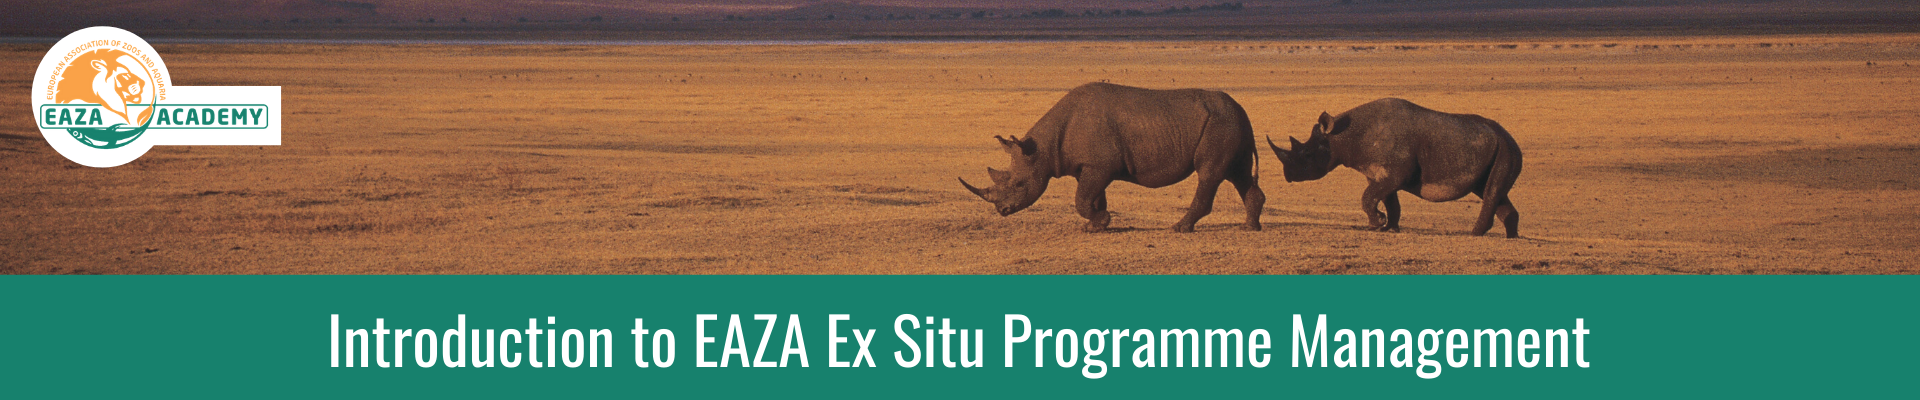 Introduction to EAZA Ex situ Programme Management, July 2022